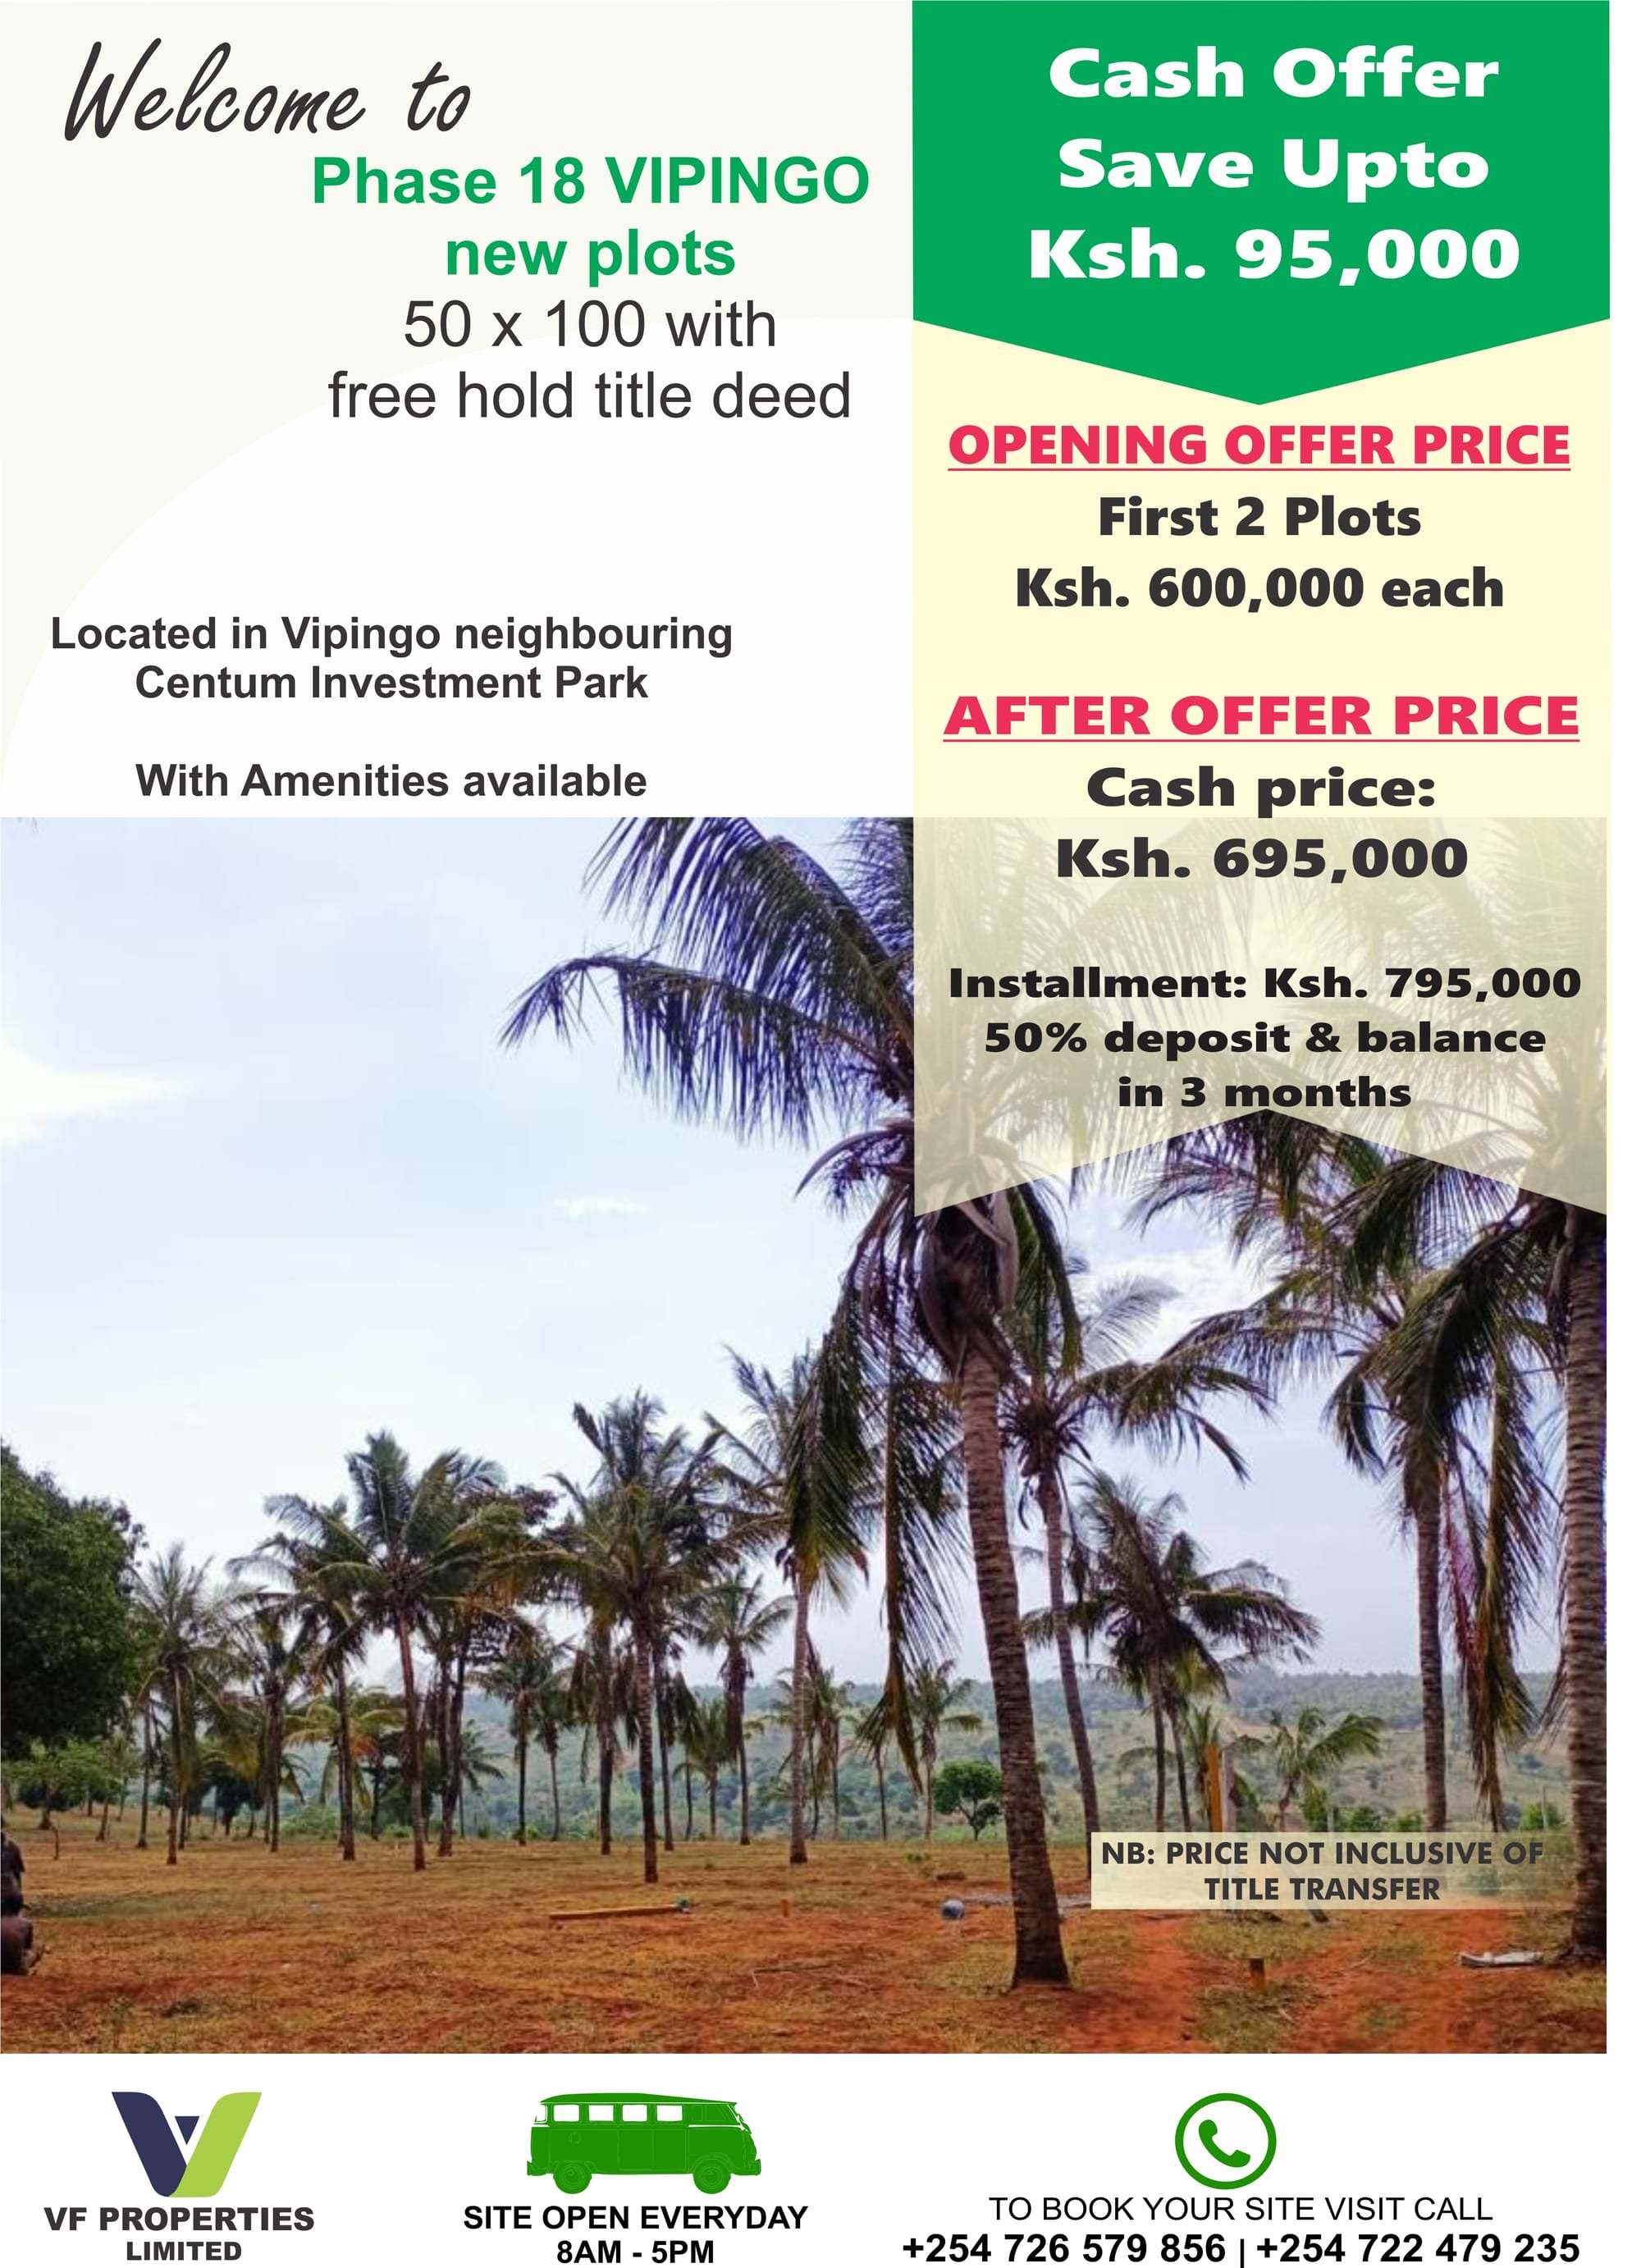 Phase 18 New Vipingo plots on Offer - SOLD OUT